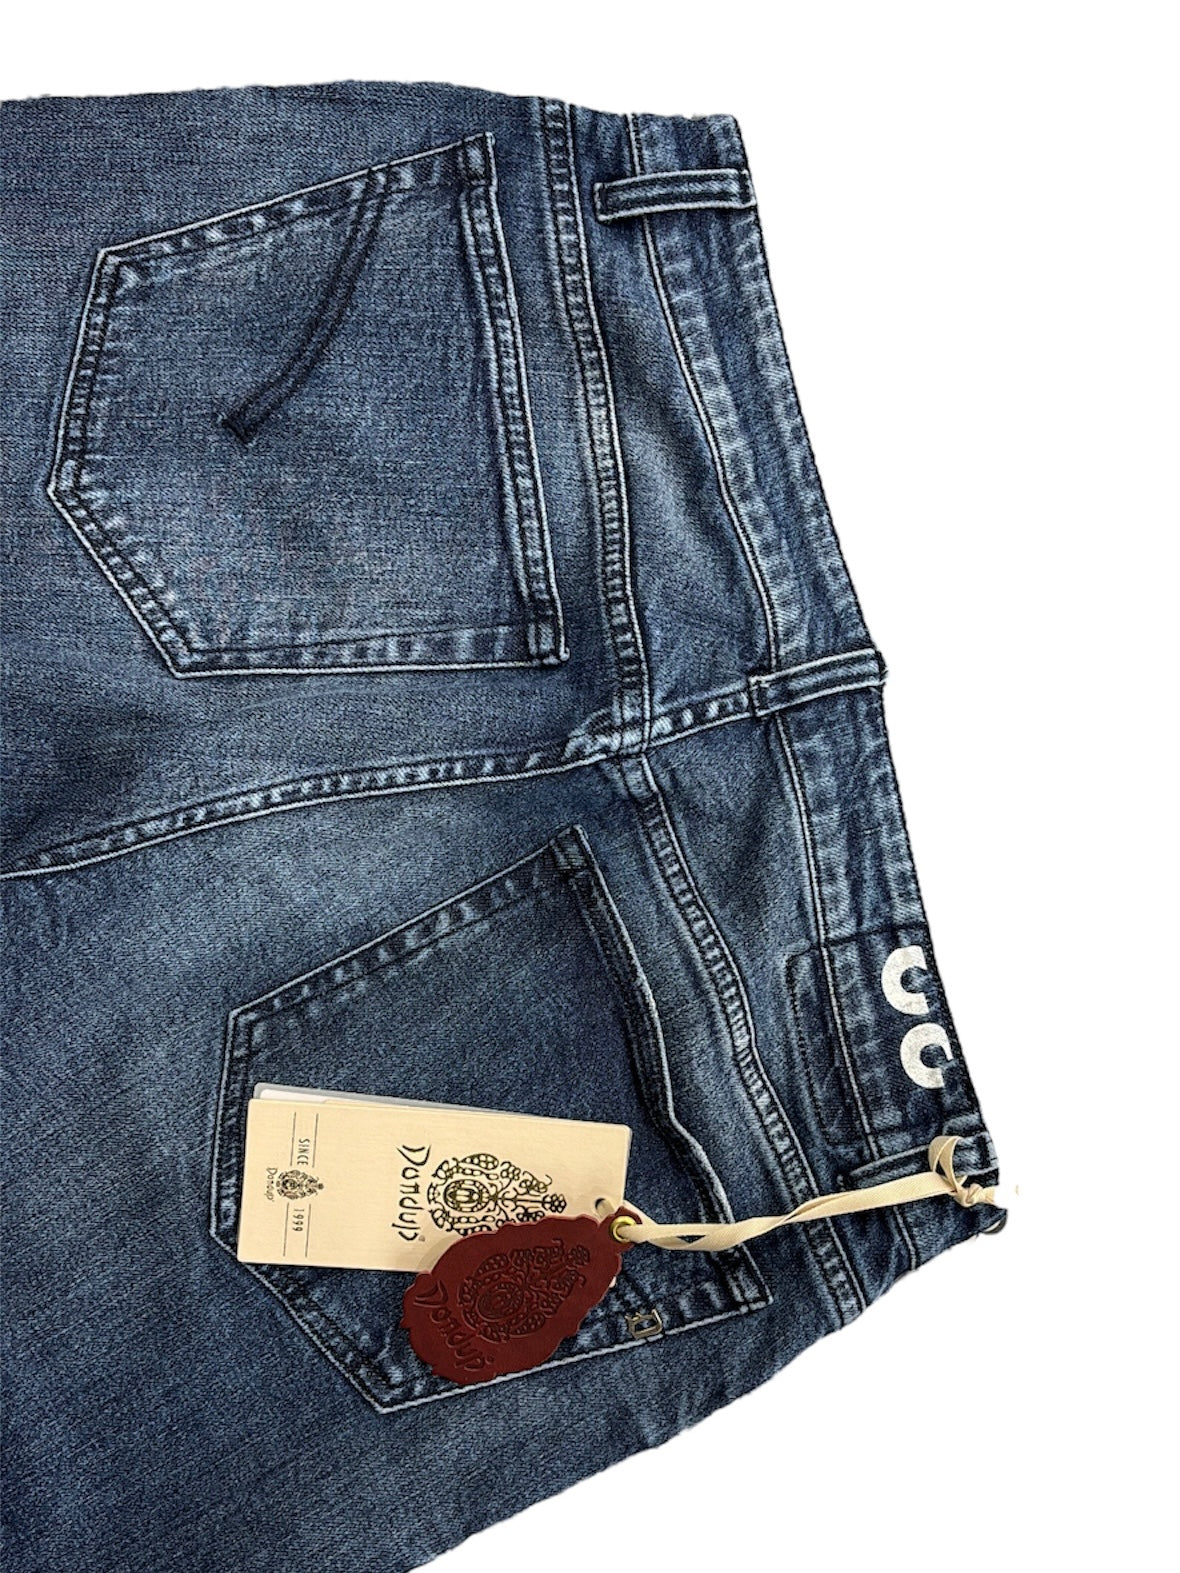 DONDUP made in italy - Jeans Slim